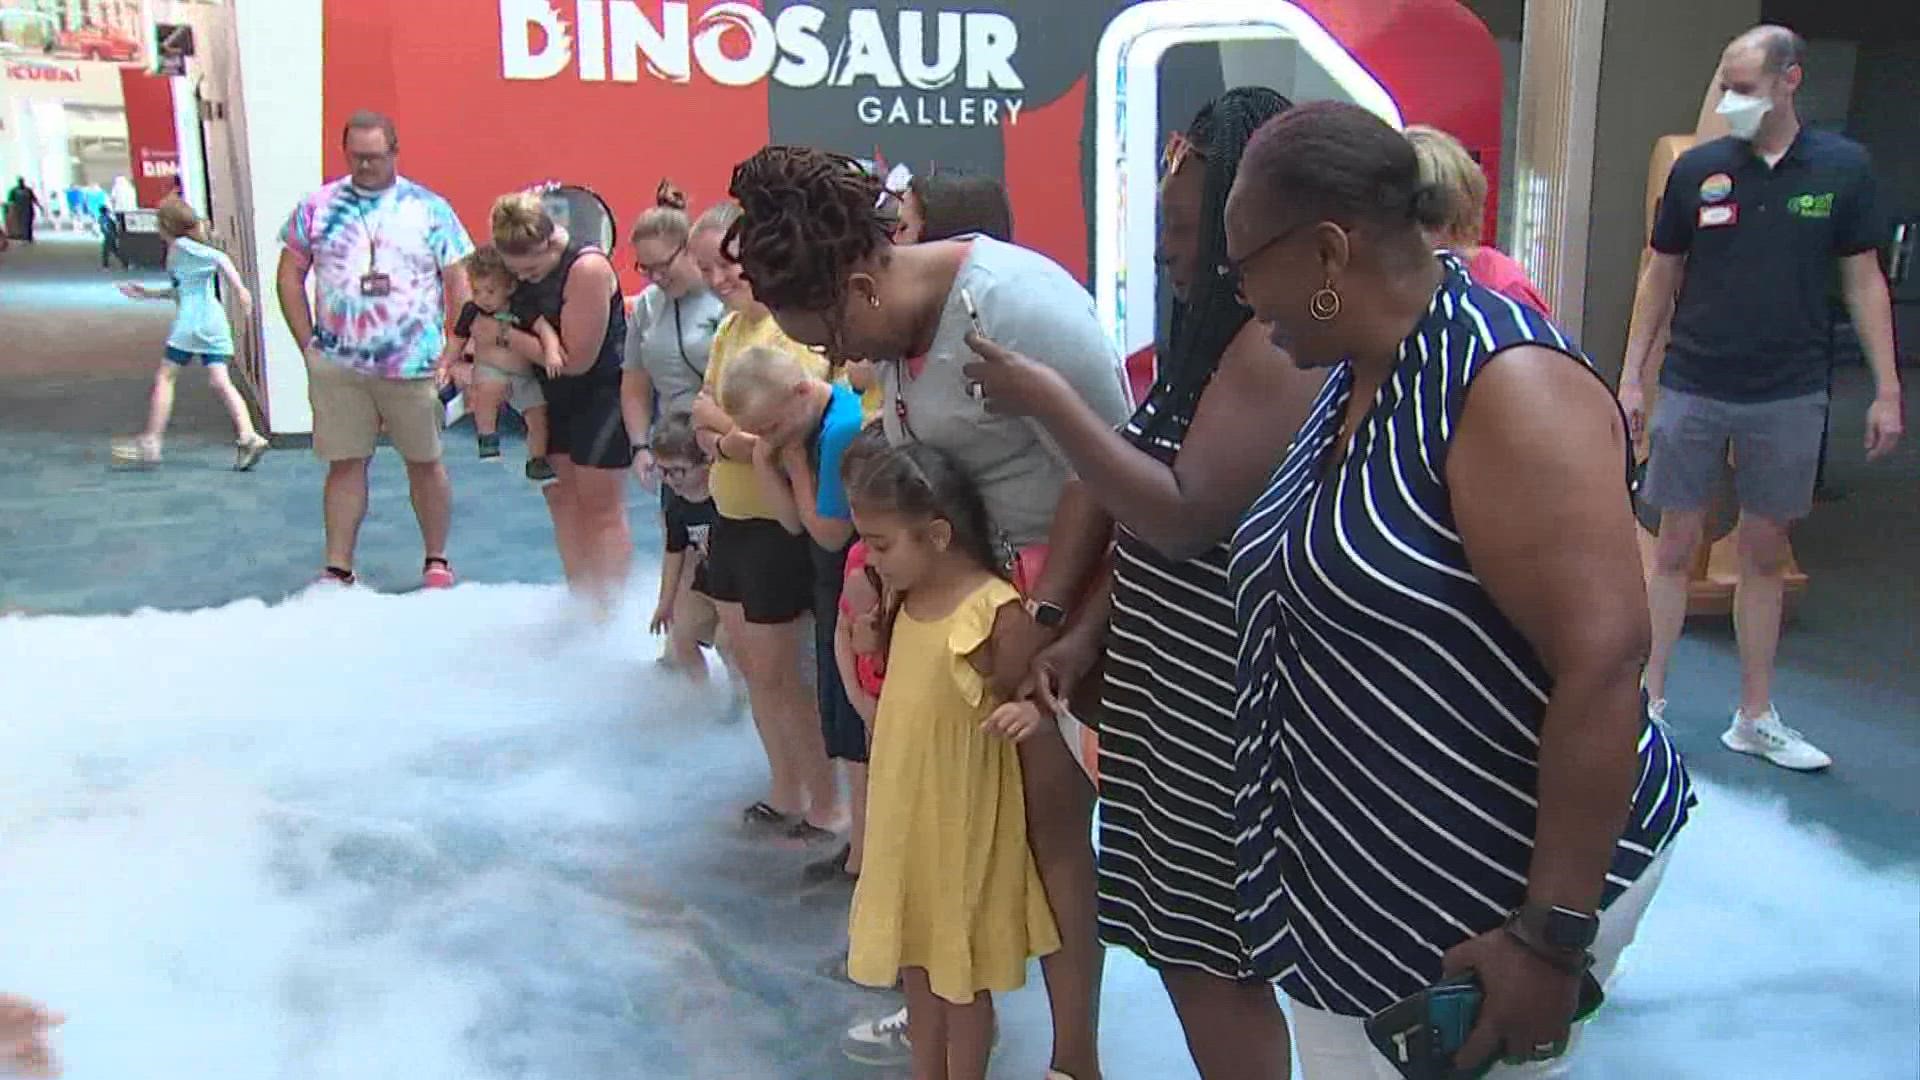 An unplanned rise in temperature lead to an unplanned visit to COSI for many central Ohio families.